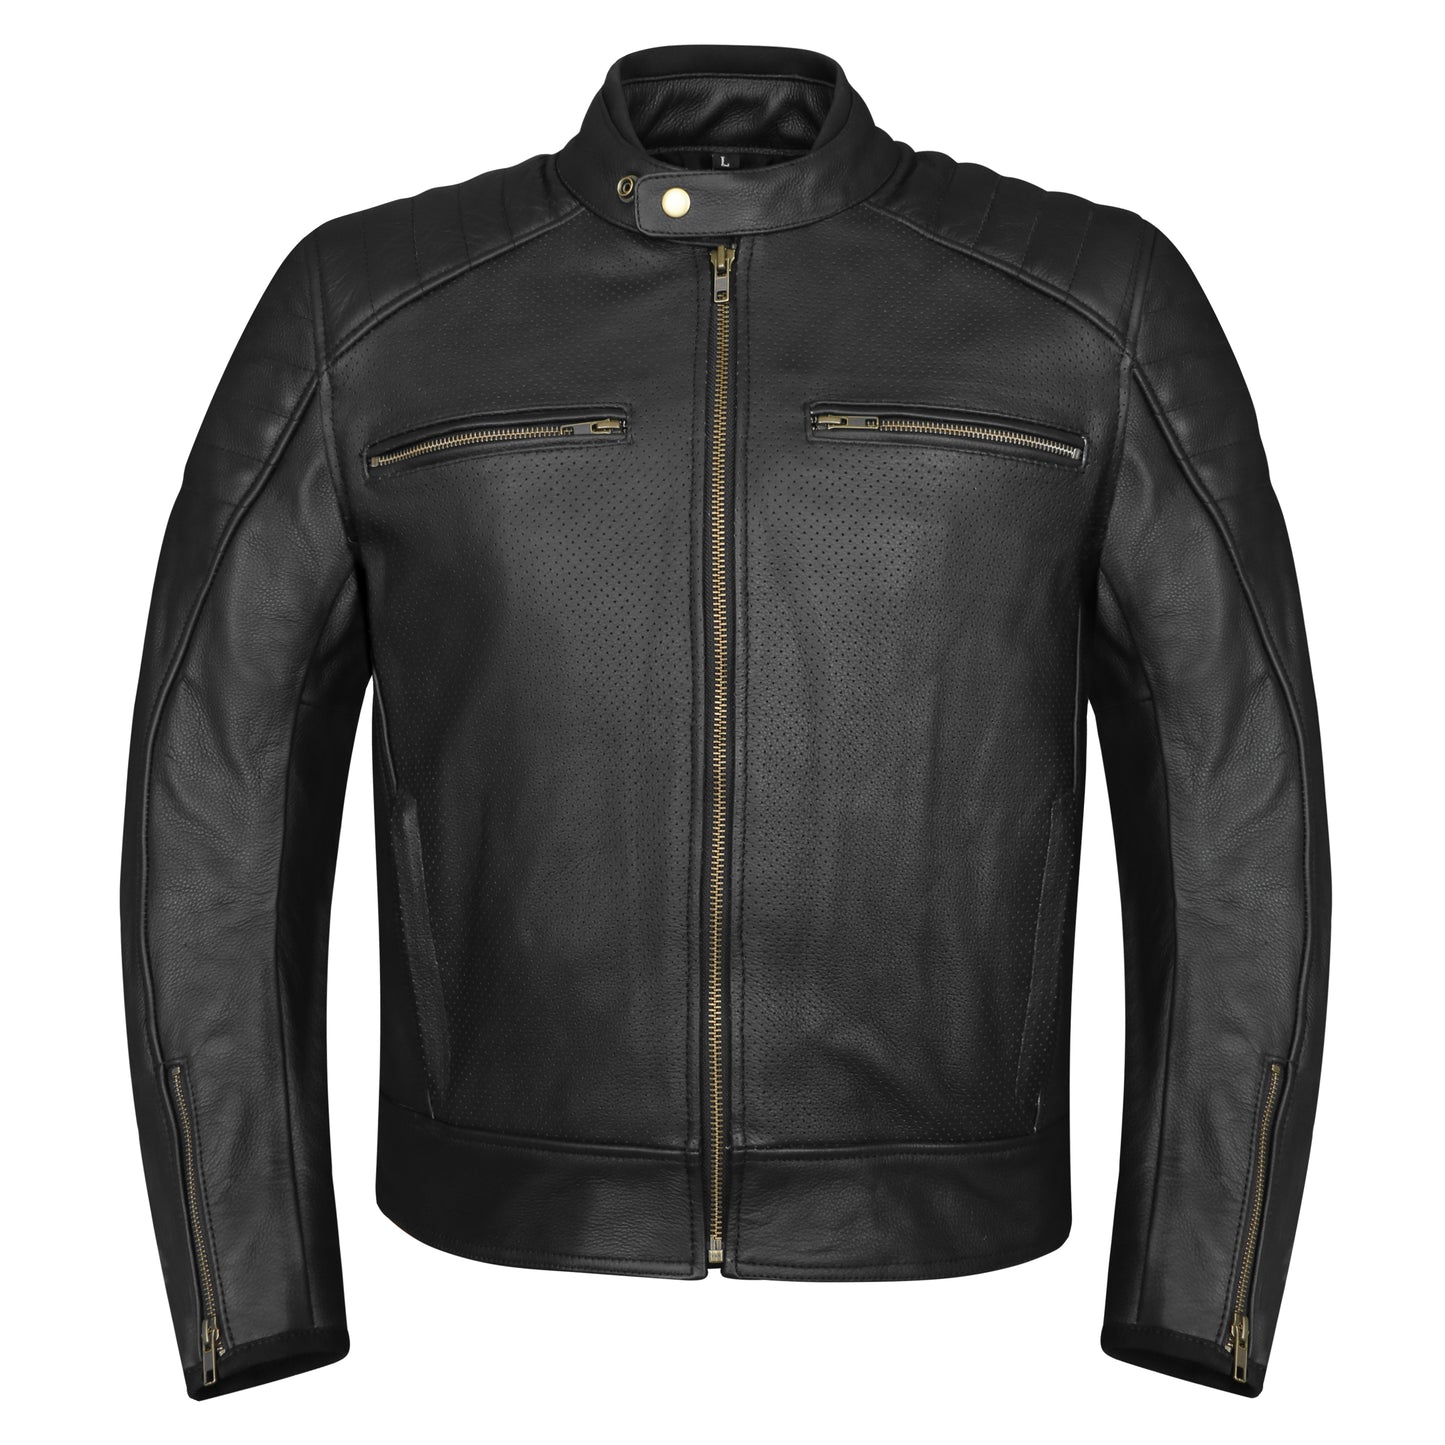 XAVIA Misano Men's Leather Motorcycle Jacket With Protections